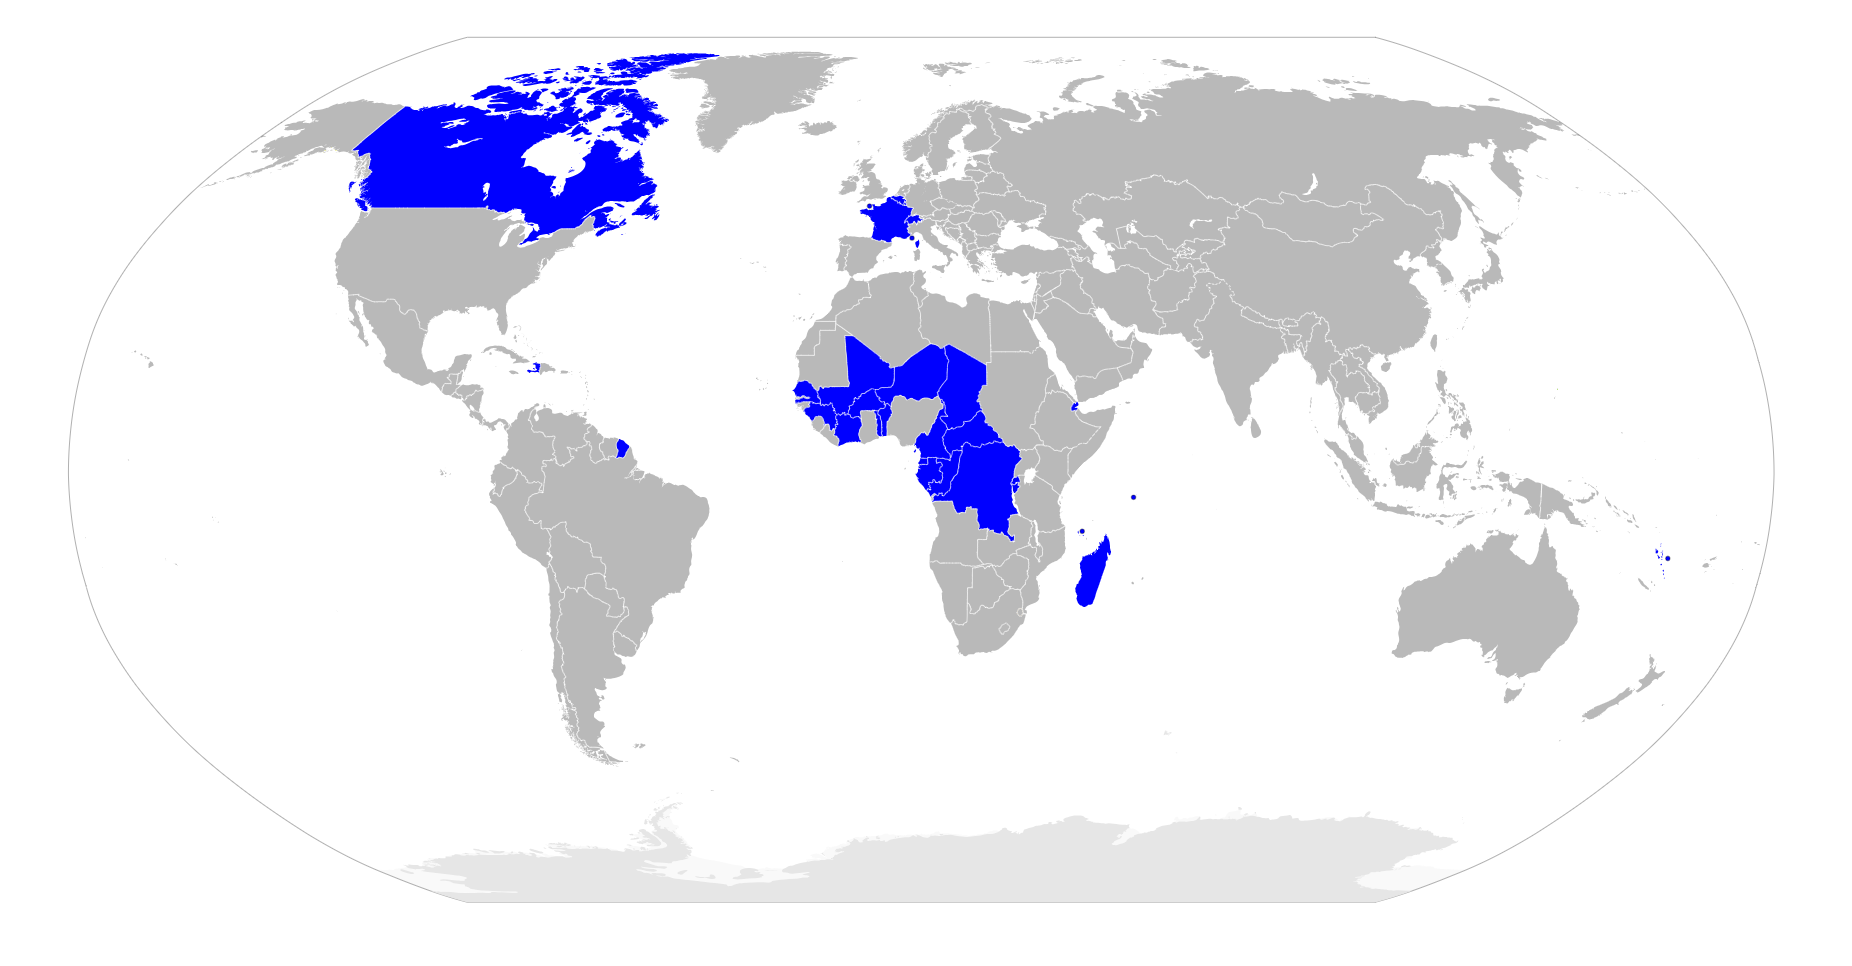 A worldmap showing countries where French is an official language in blue